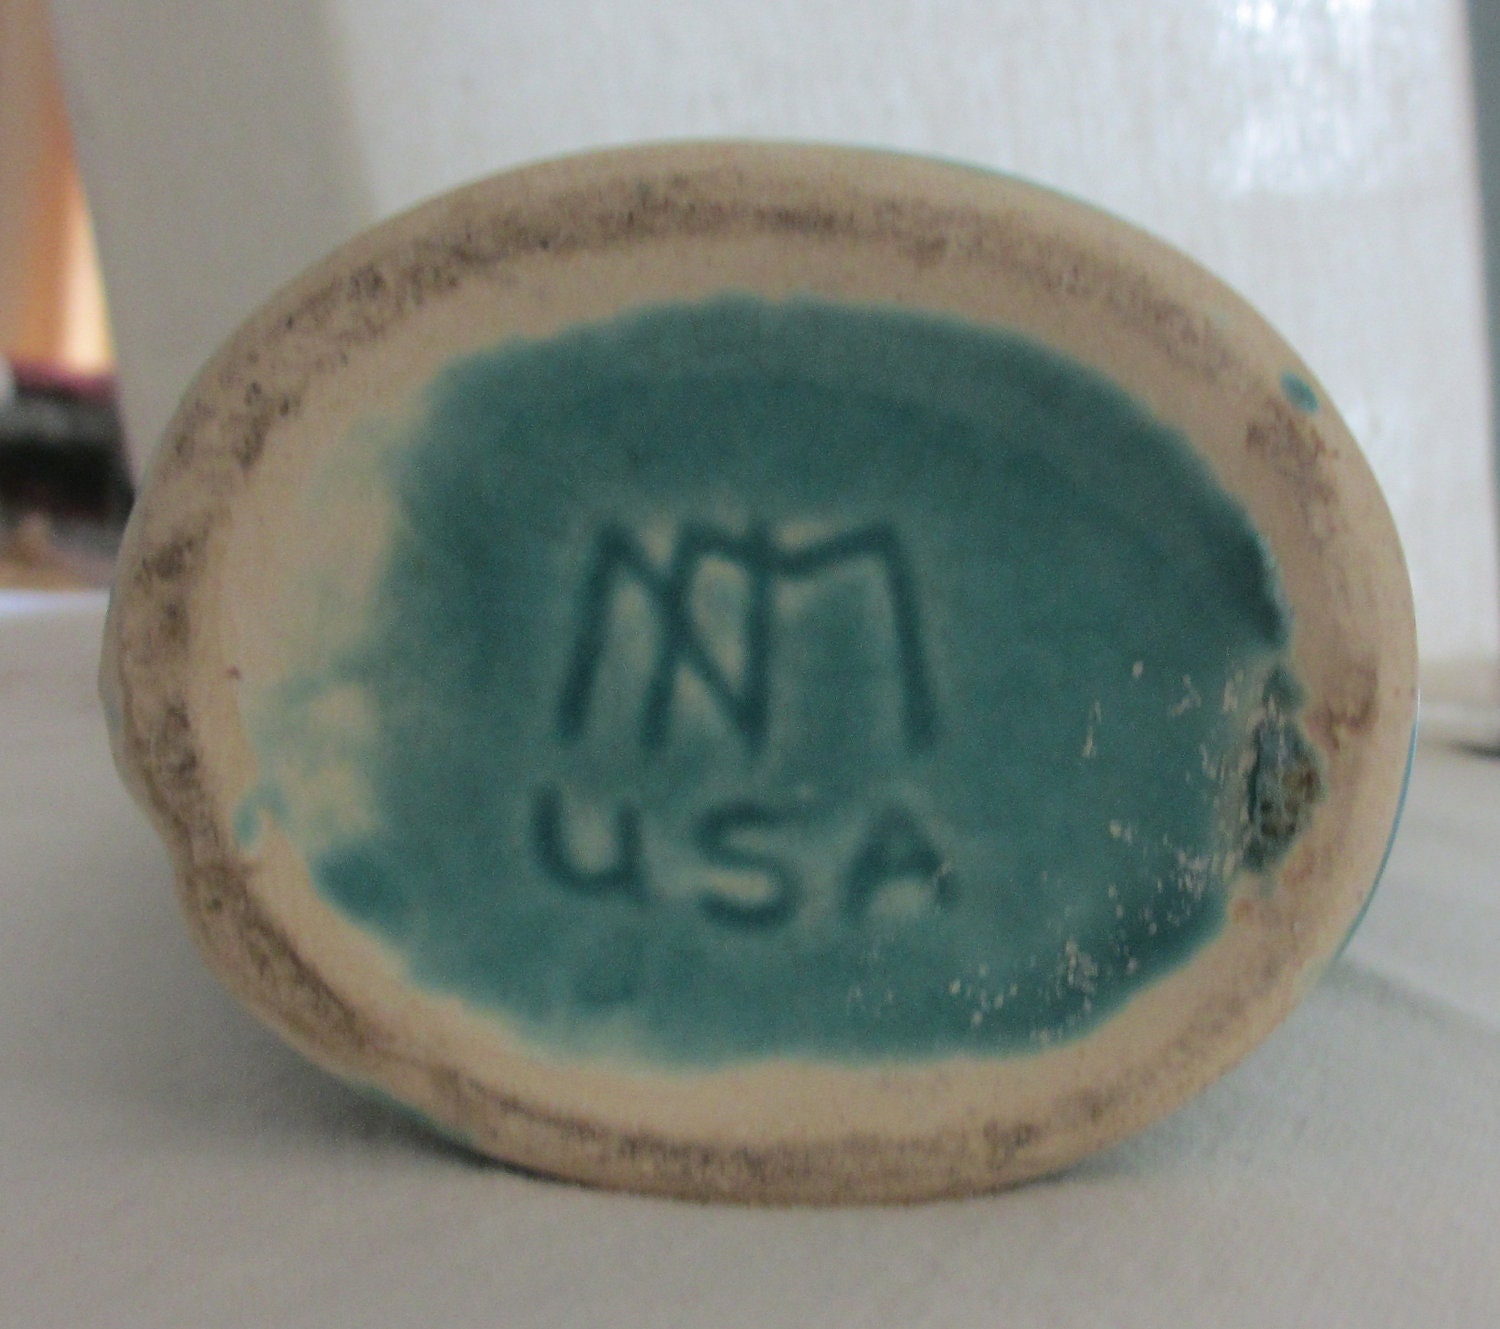 dating mccoy pottery with usa stamped on bottom